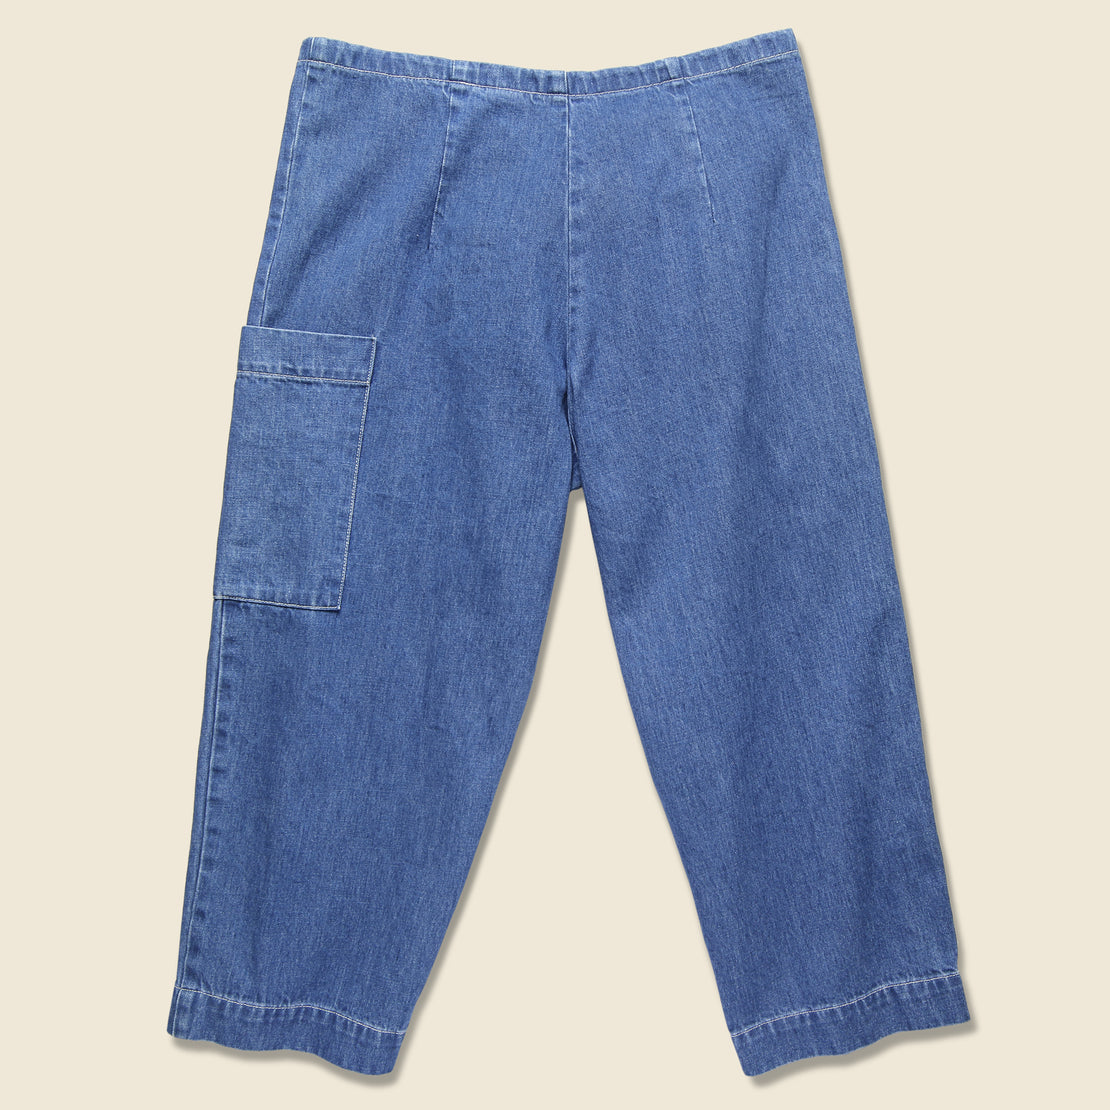 Beach Pant - Sun Bleached Blue - Levis Made & Crafted - STAG Provisions - W - Pants - Denim